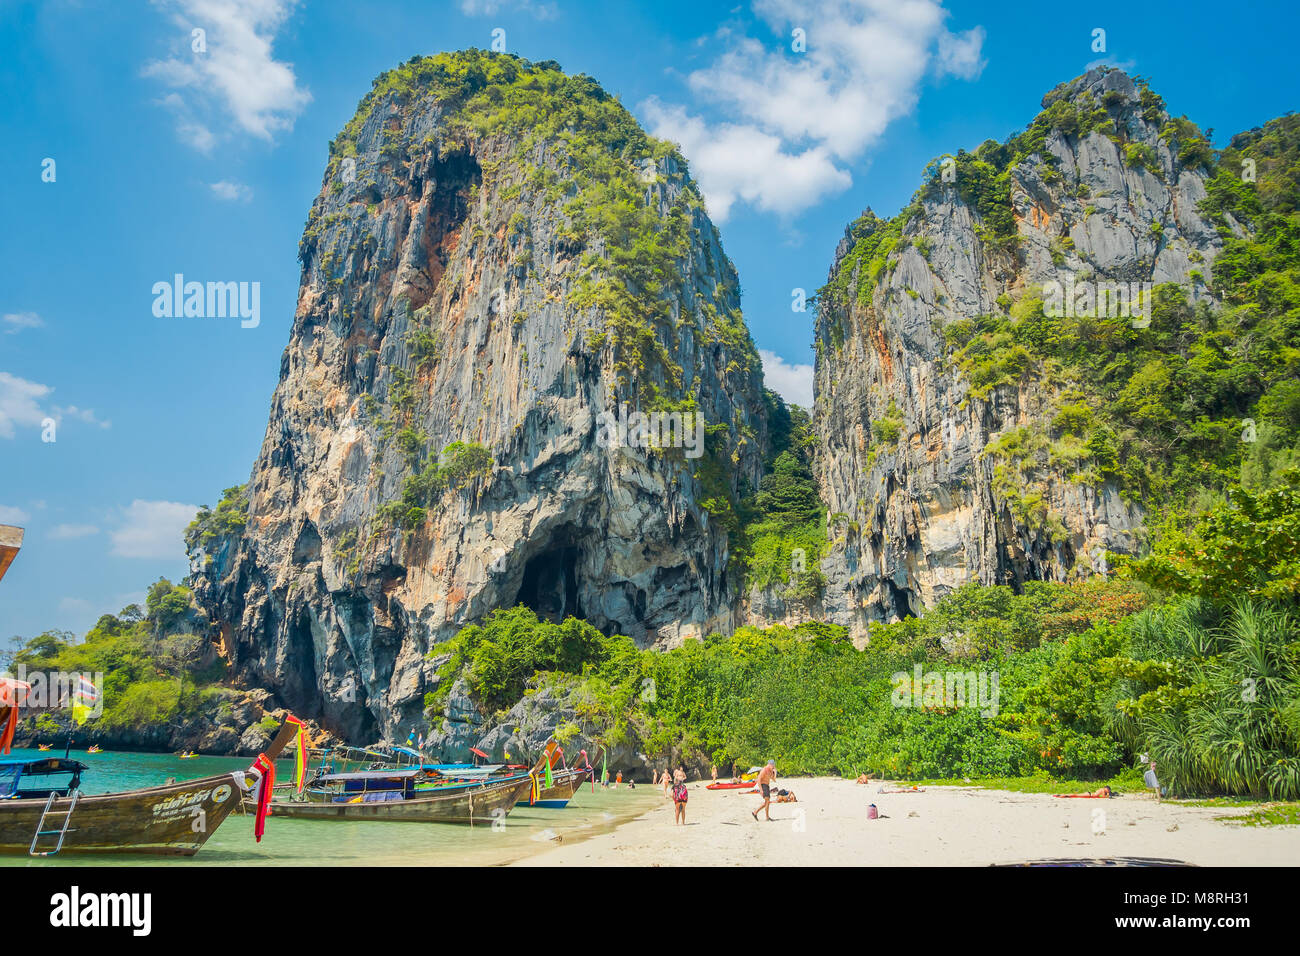 PHRA NANG, THAILAND - FEBRUARY 09, 2018: Outdoor view of unidentified people enjoying the beautiful sunny day, white sand and turquoise water on Phra nang island Stock Photo